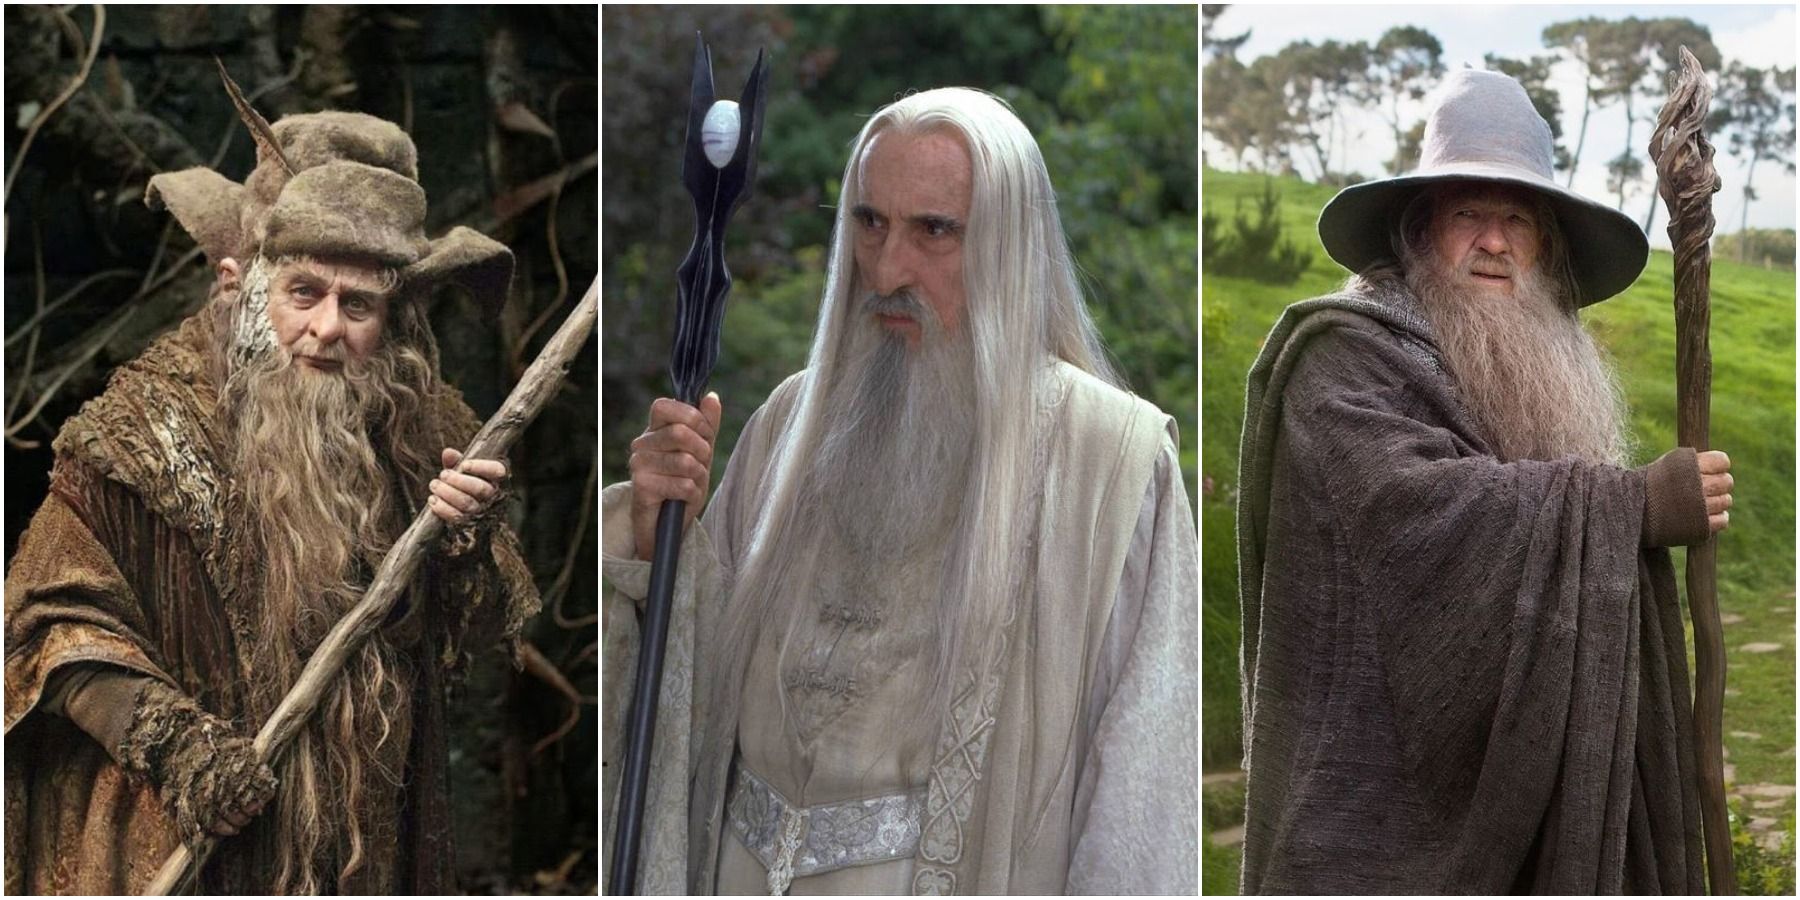 Saruman, Gandalf, and Radagast in The Lord of the Rings and The Hobbit